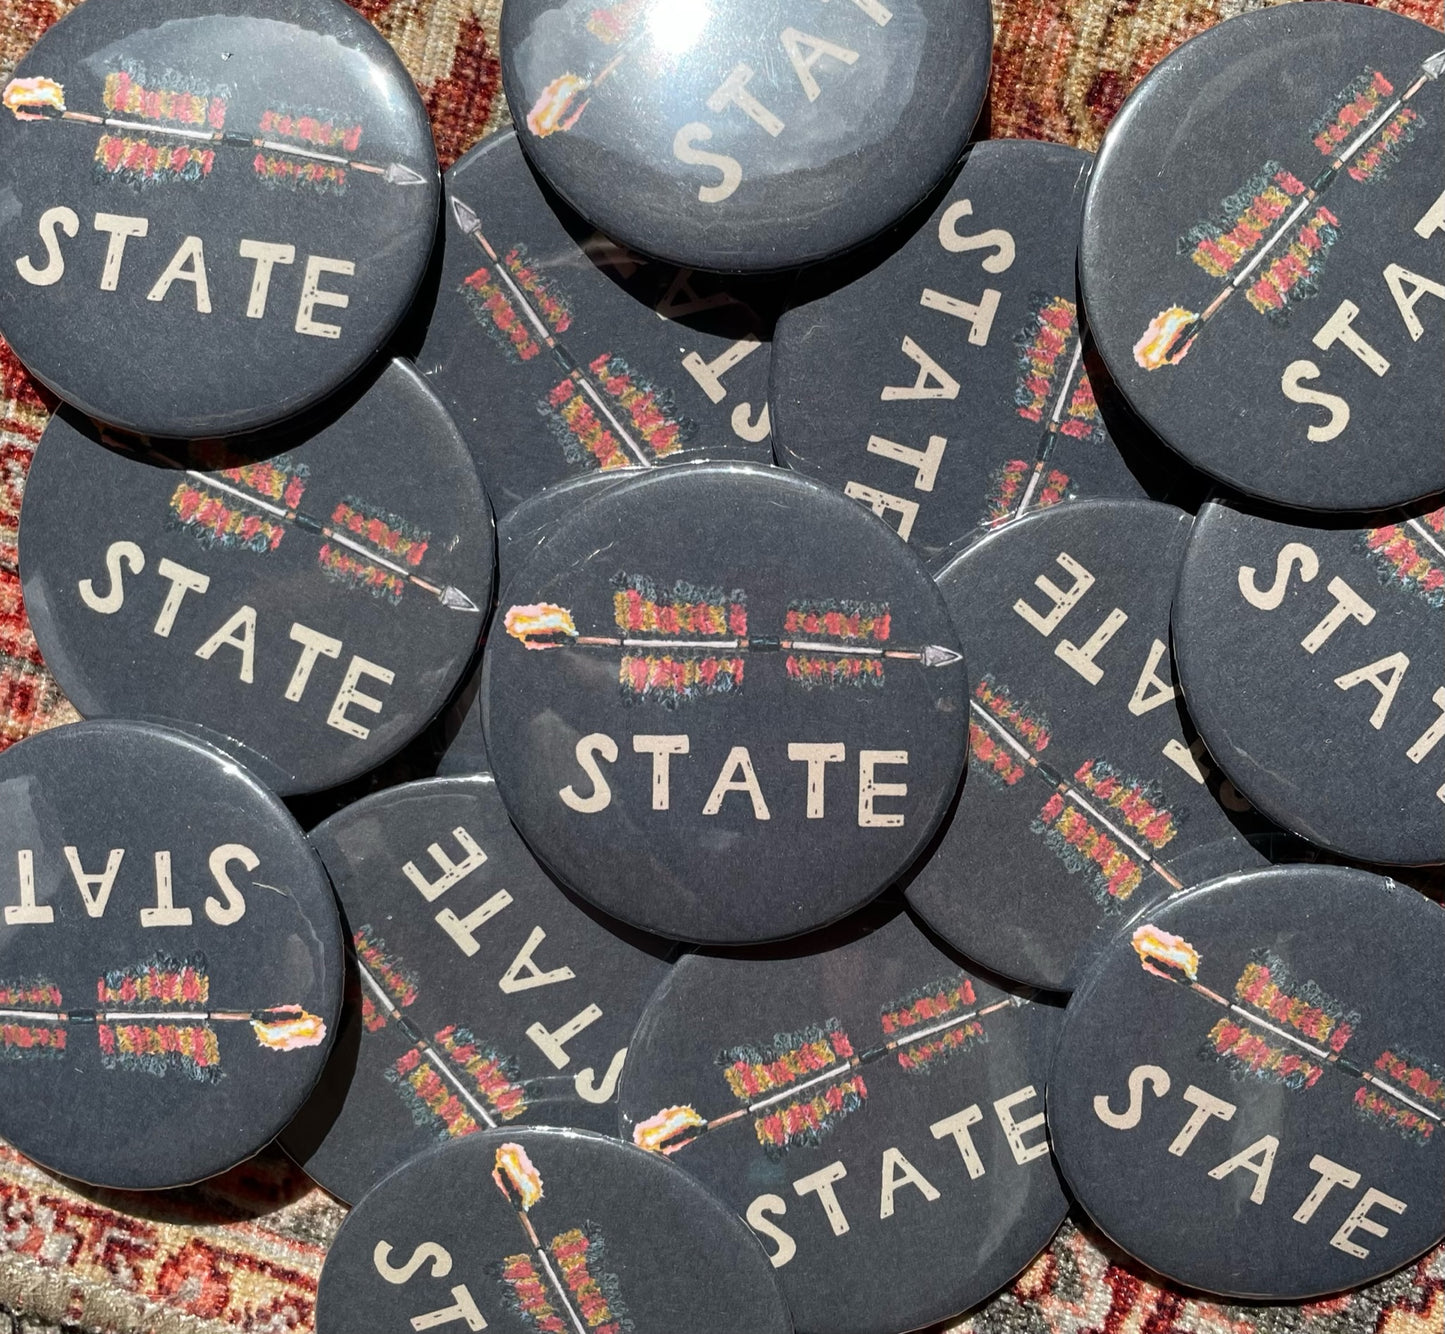 Florida State University “STATE” spear button